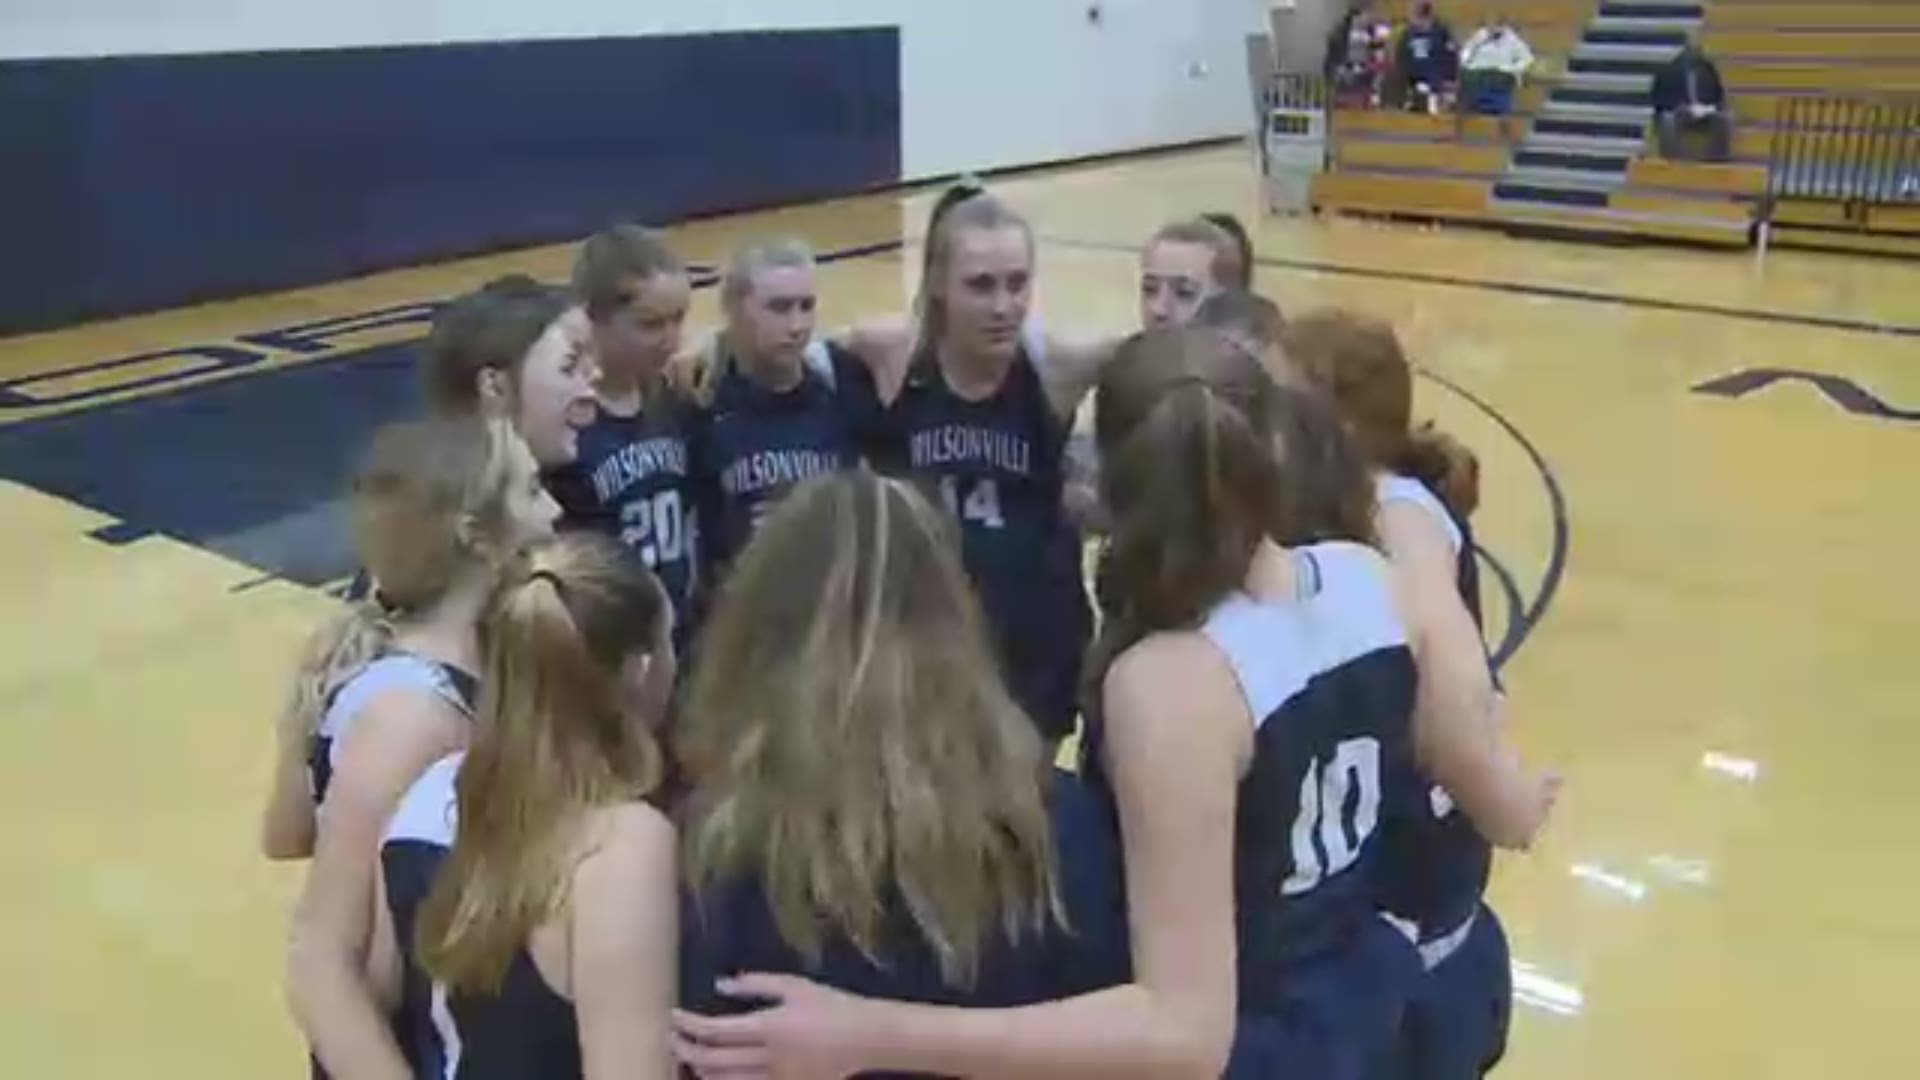 Highlights of No. 2 Wilsonville's 54-45 win over Skyview on Jan. 10, 2020. Highlights are part of KGW's Friday Night Hoops with Orlando Sanchez.